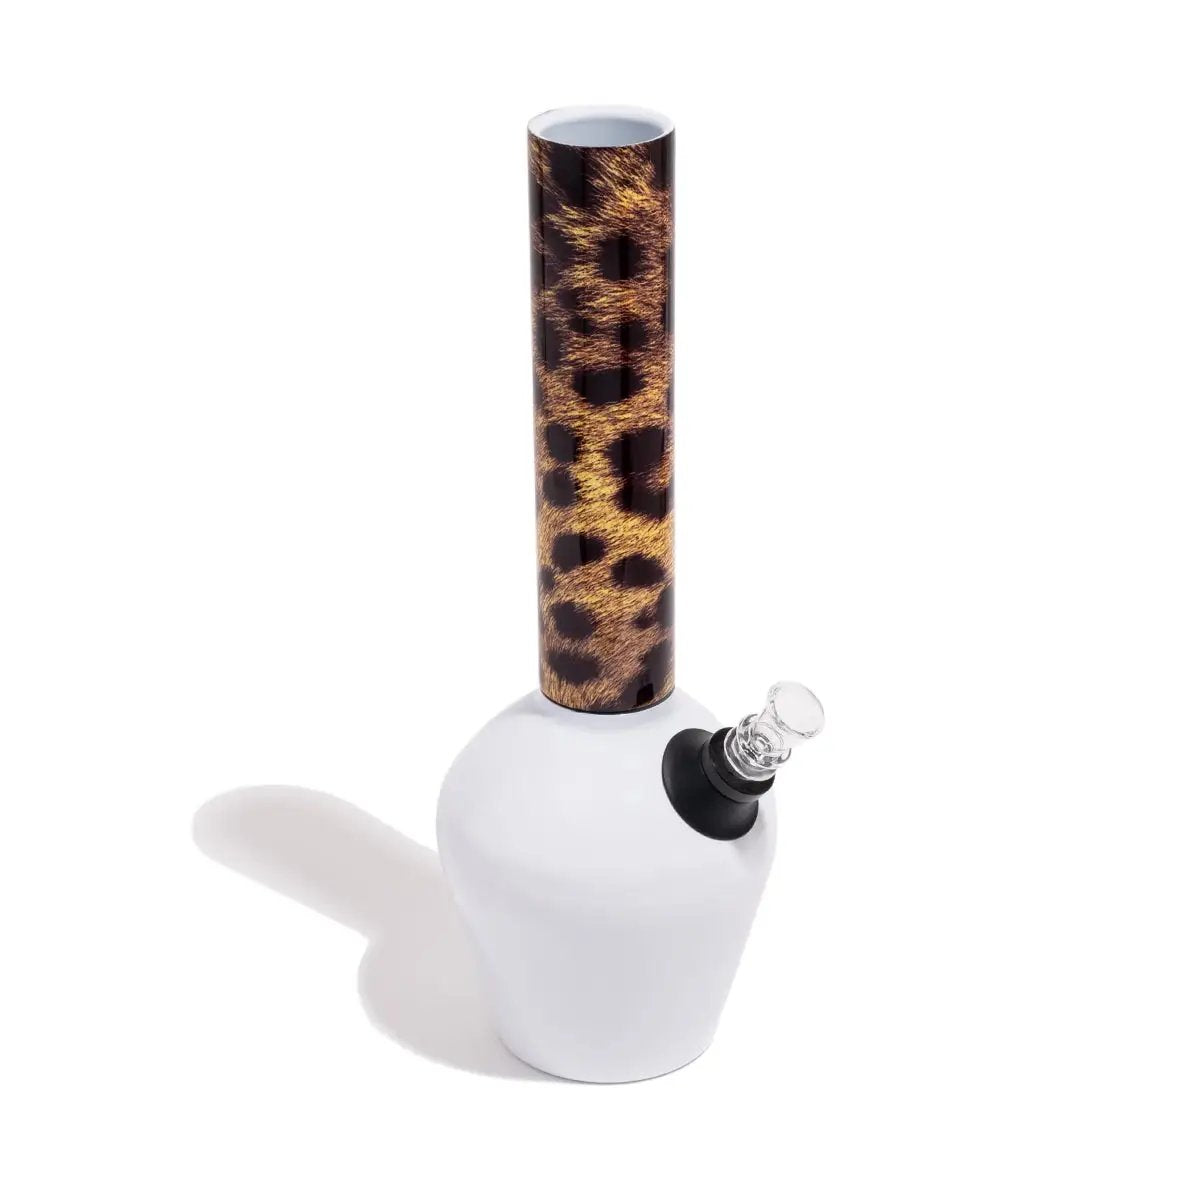 Chill - Mix & Match Series - Leopard Neckpiece by Chill Steel Pipes